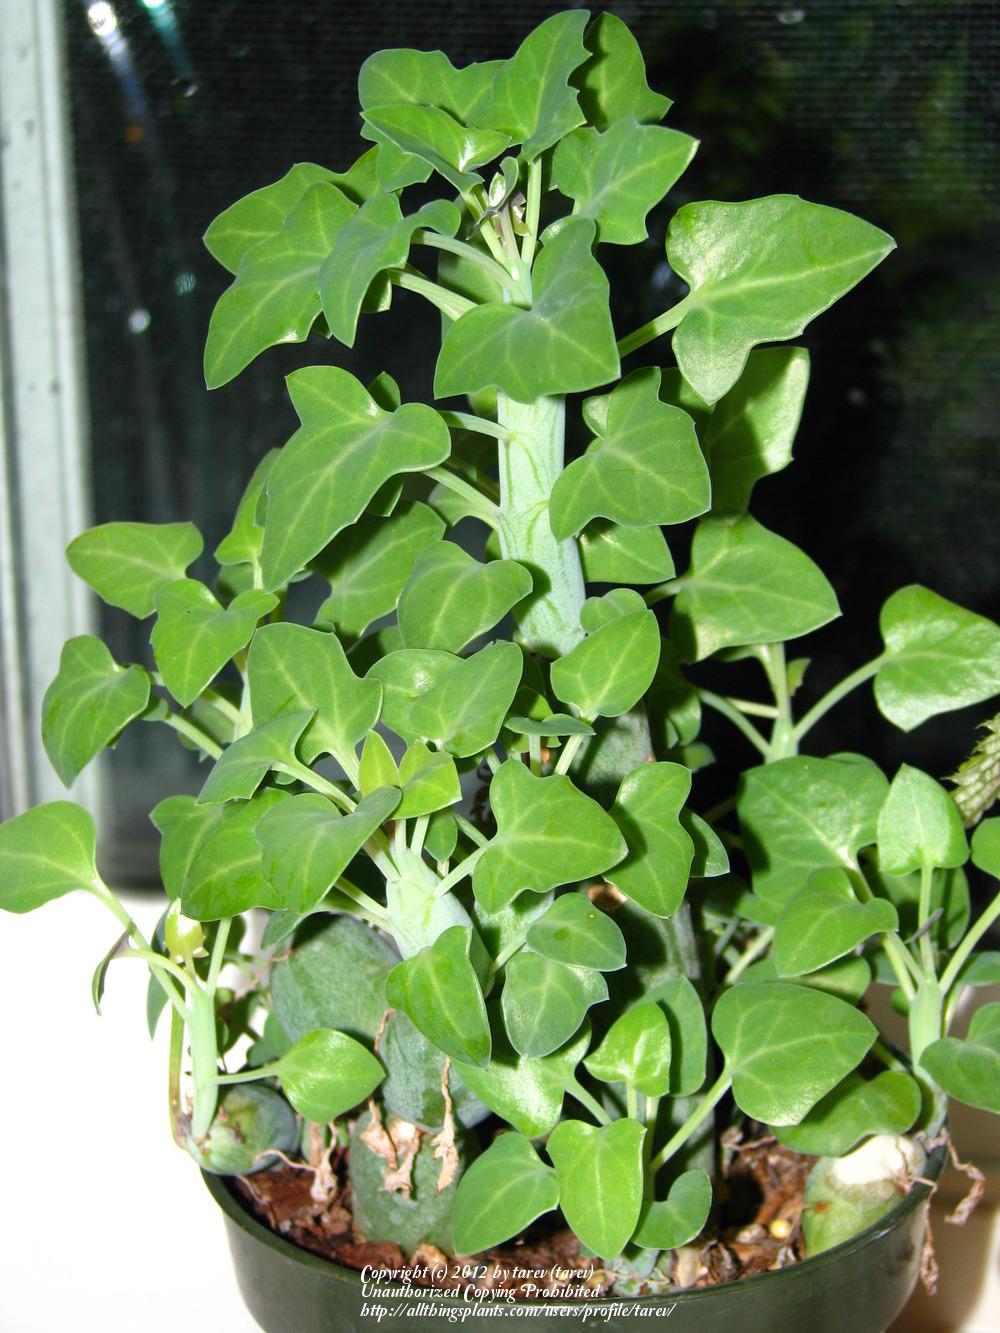 Photo of Candle Plant (Curio articulatus) uploaded by tarev